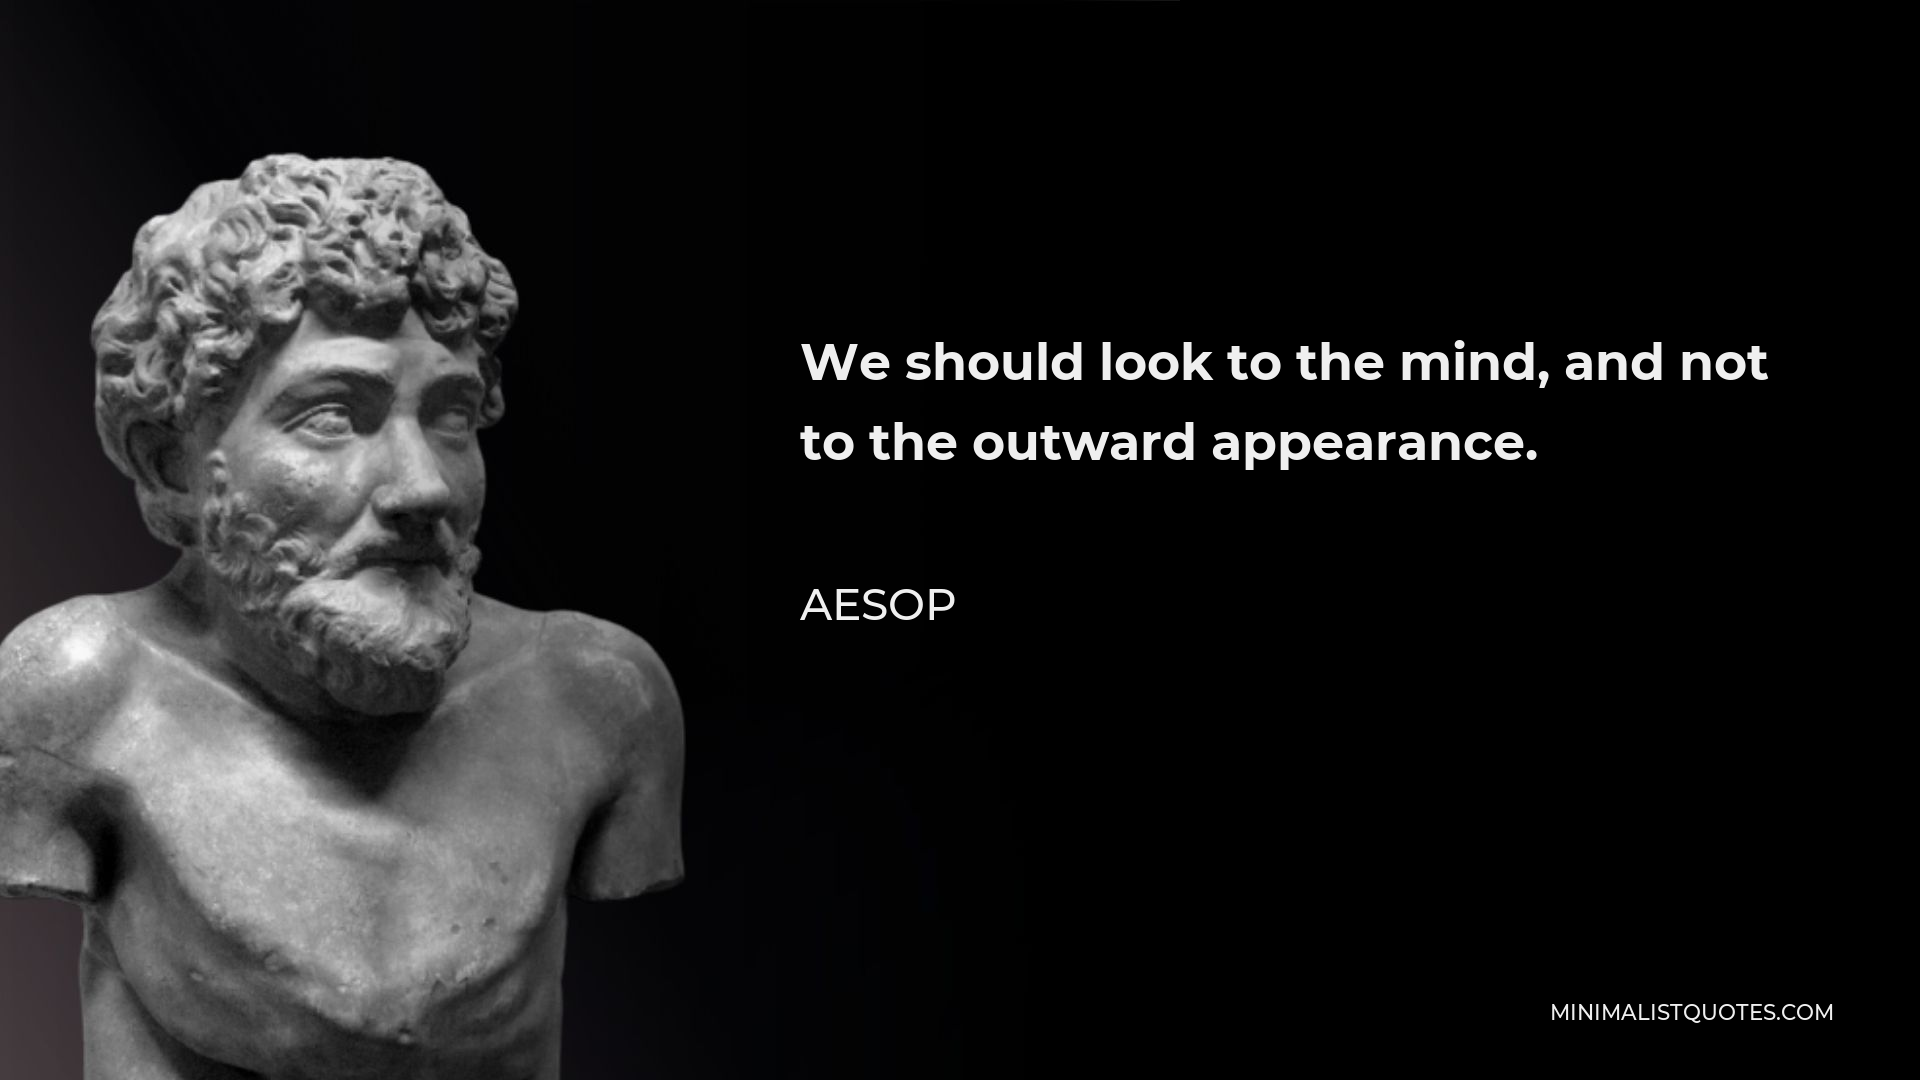 Aesop Quote - We should look to the mind, and not to the outward appearance.